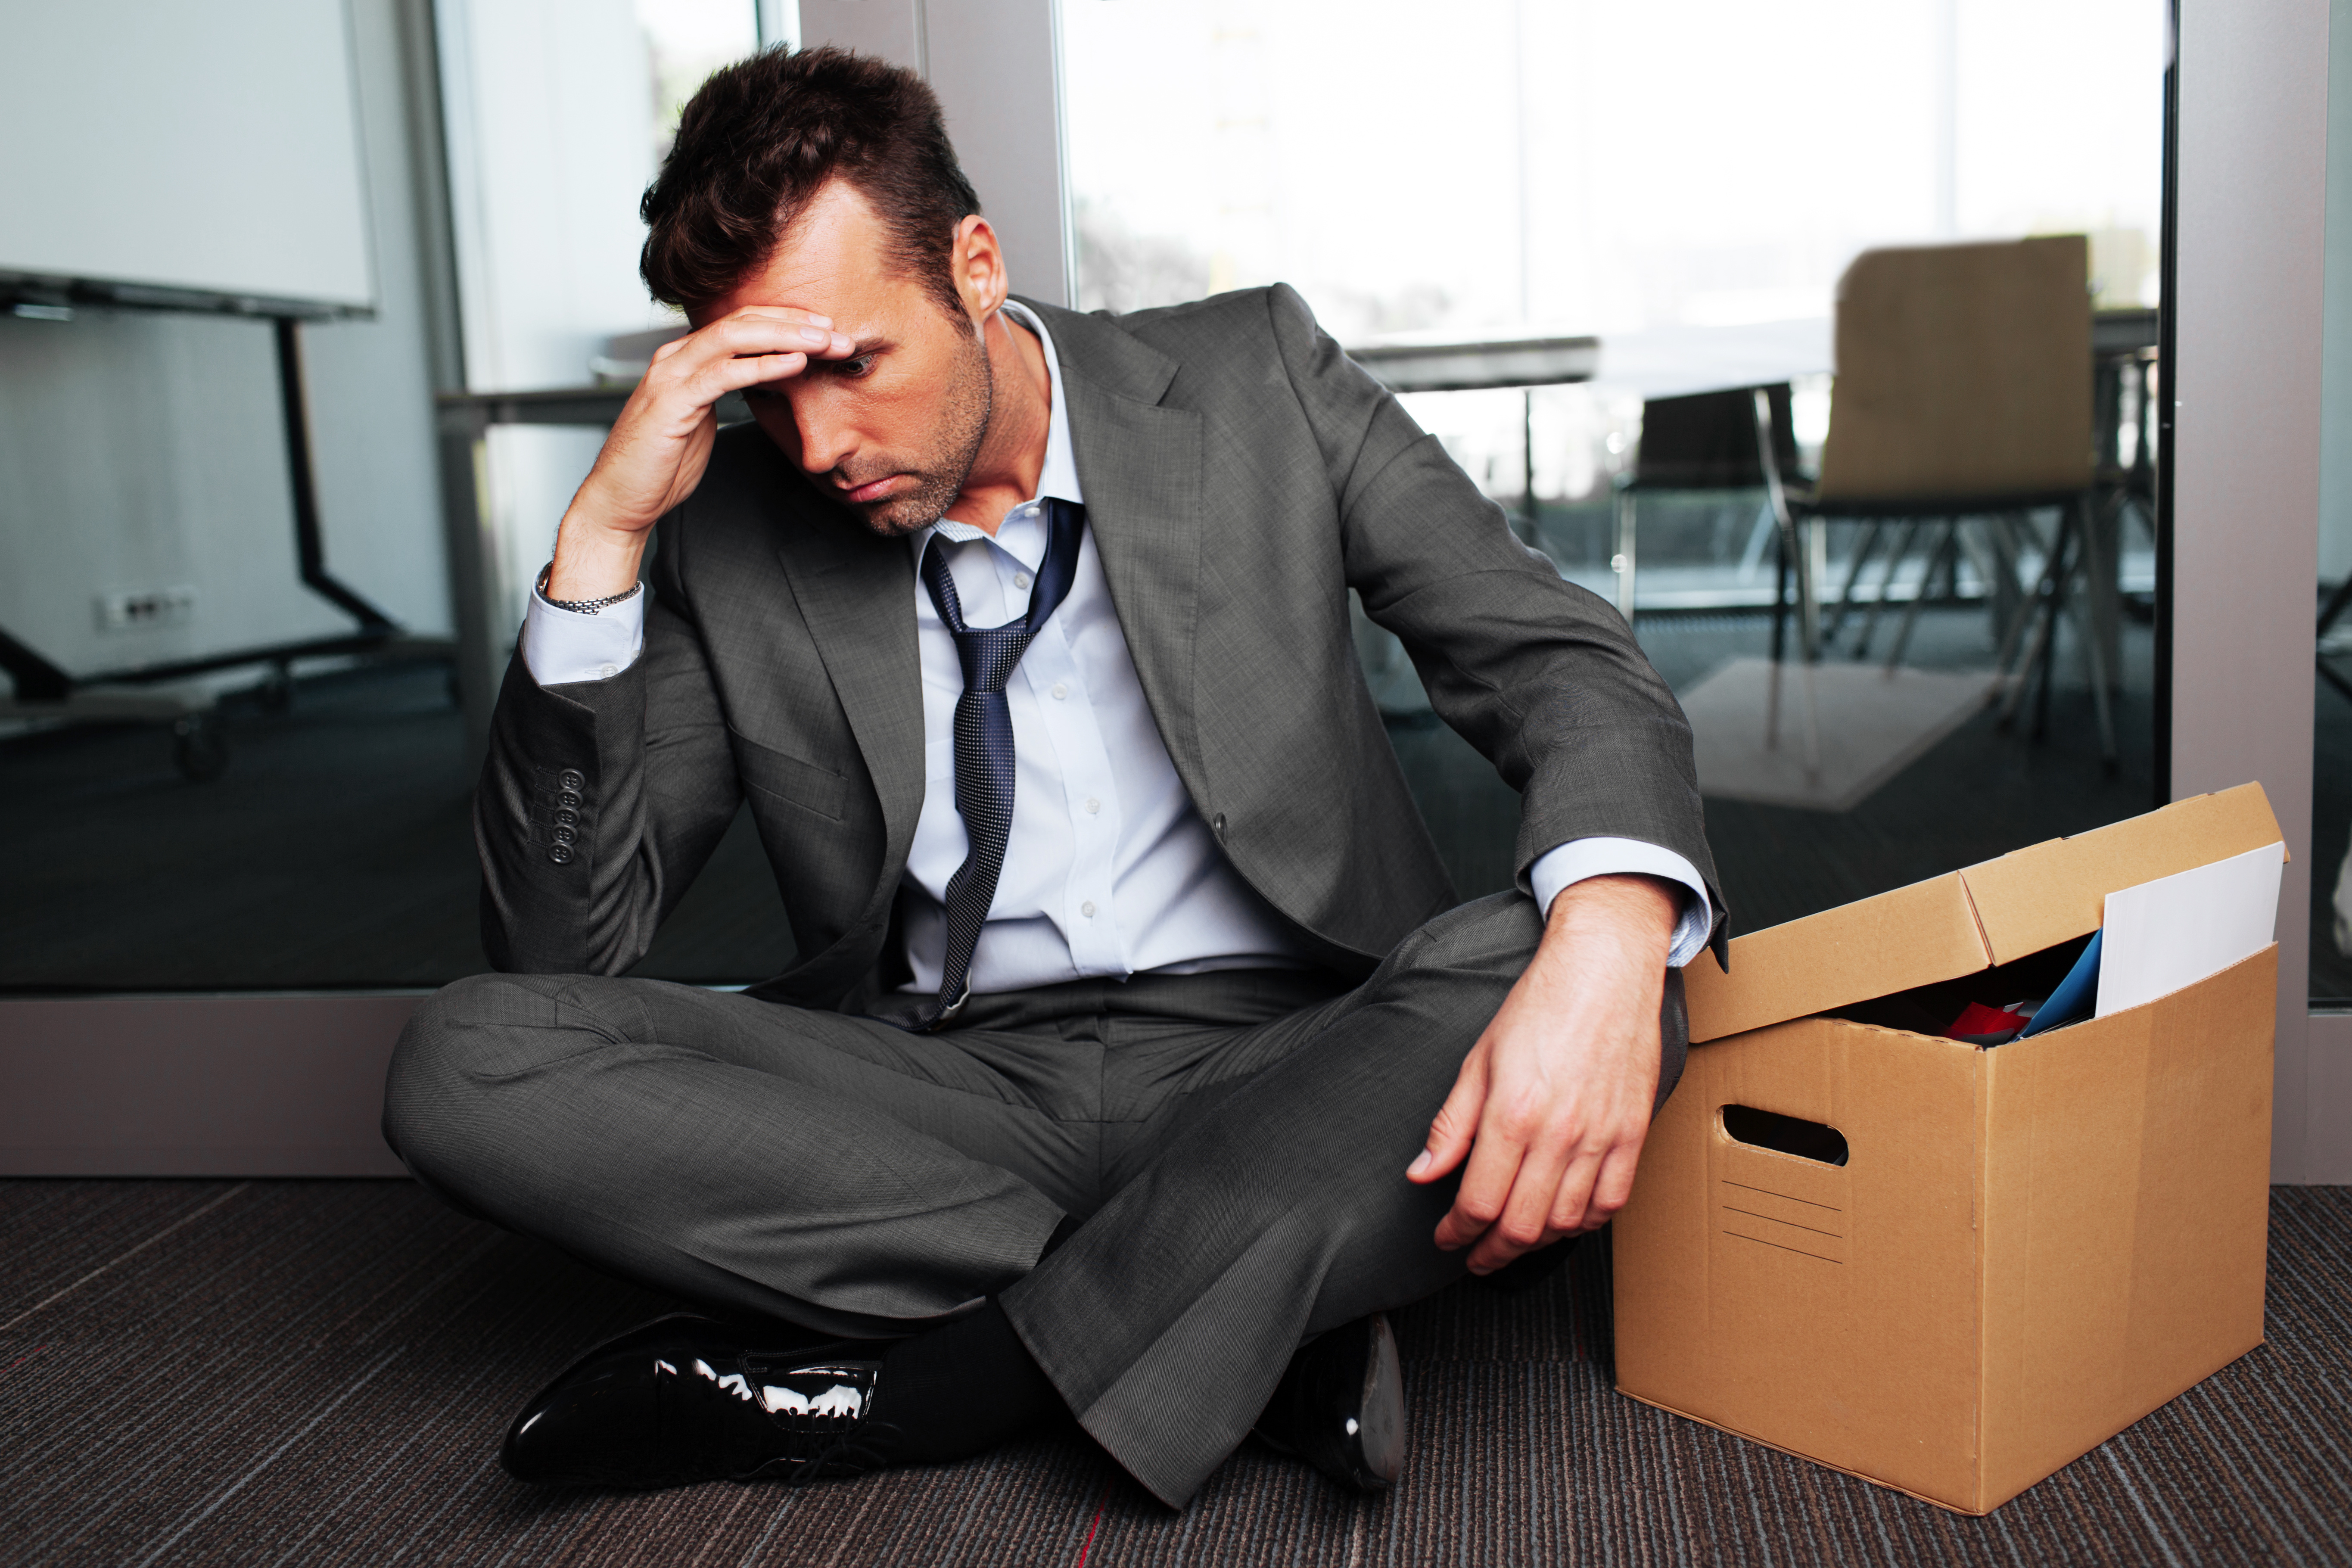 Sad fired businessman sitting outside meeting room after being dismissed